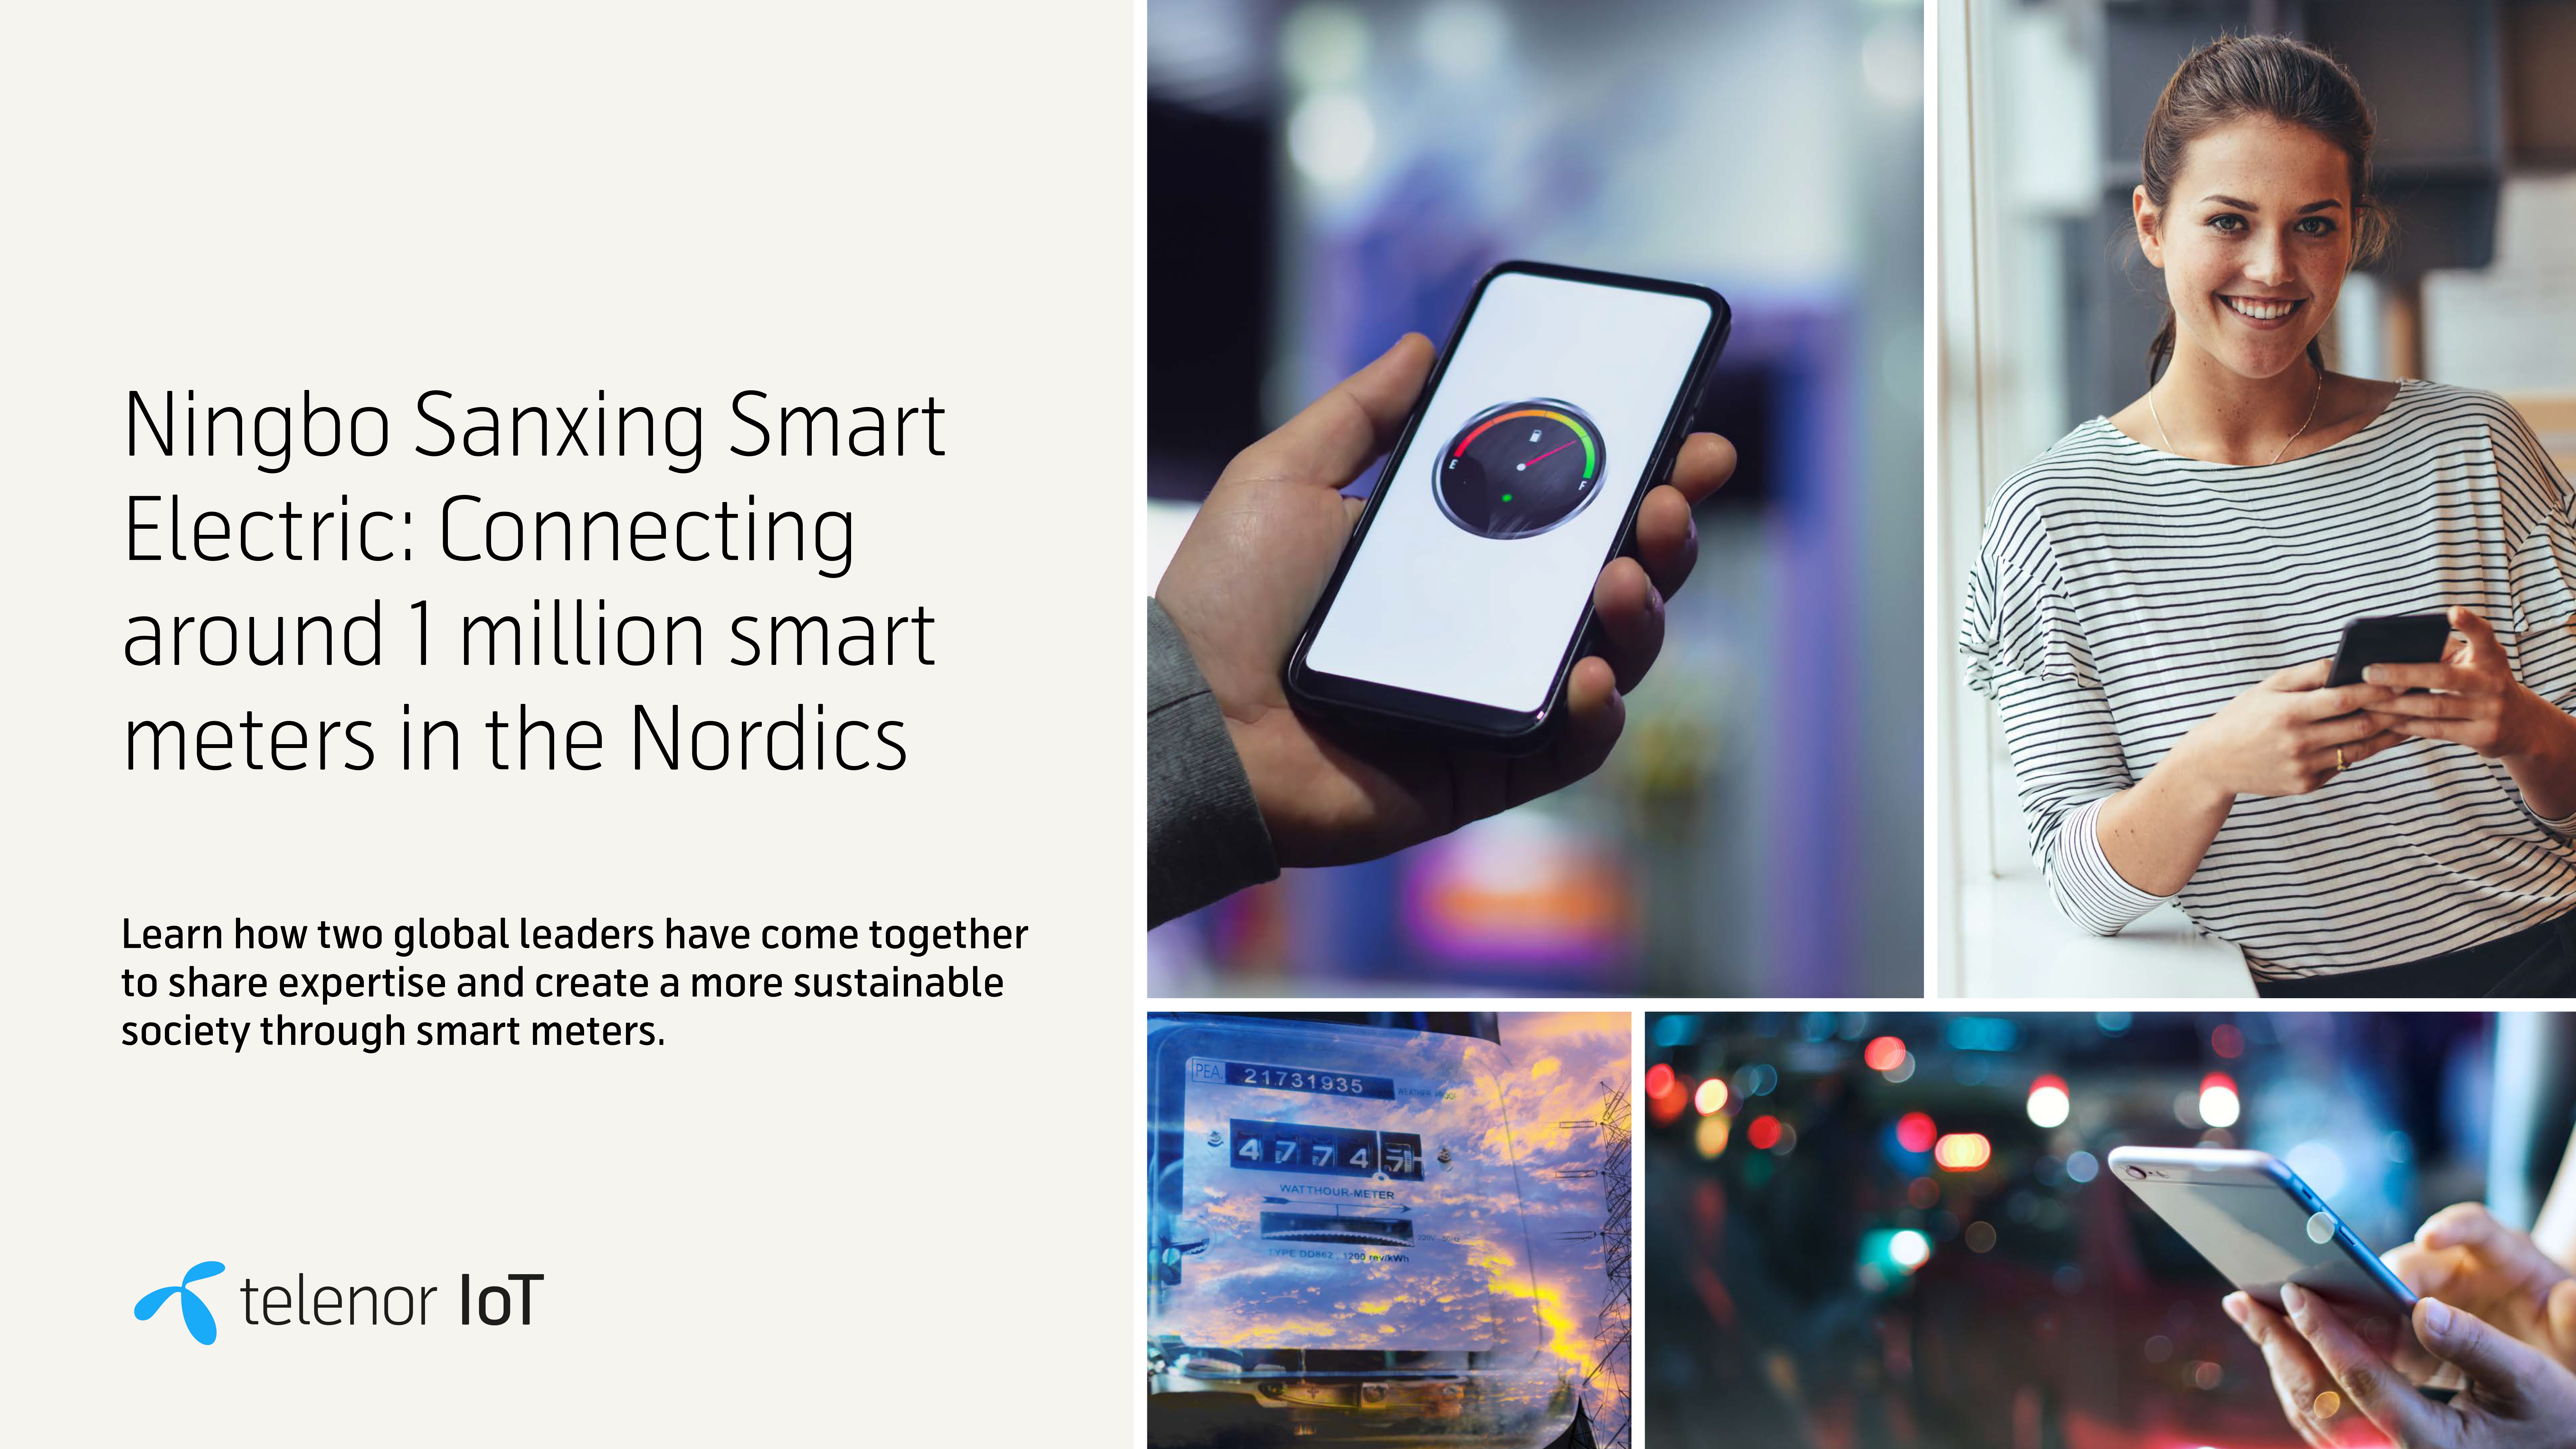 Ningbo Sanxing Smart Electric: Connecting around 1 million smart meters in the Nordics image